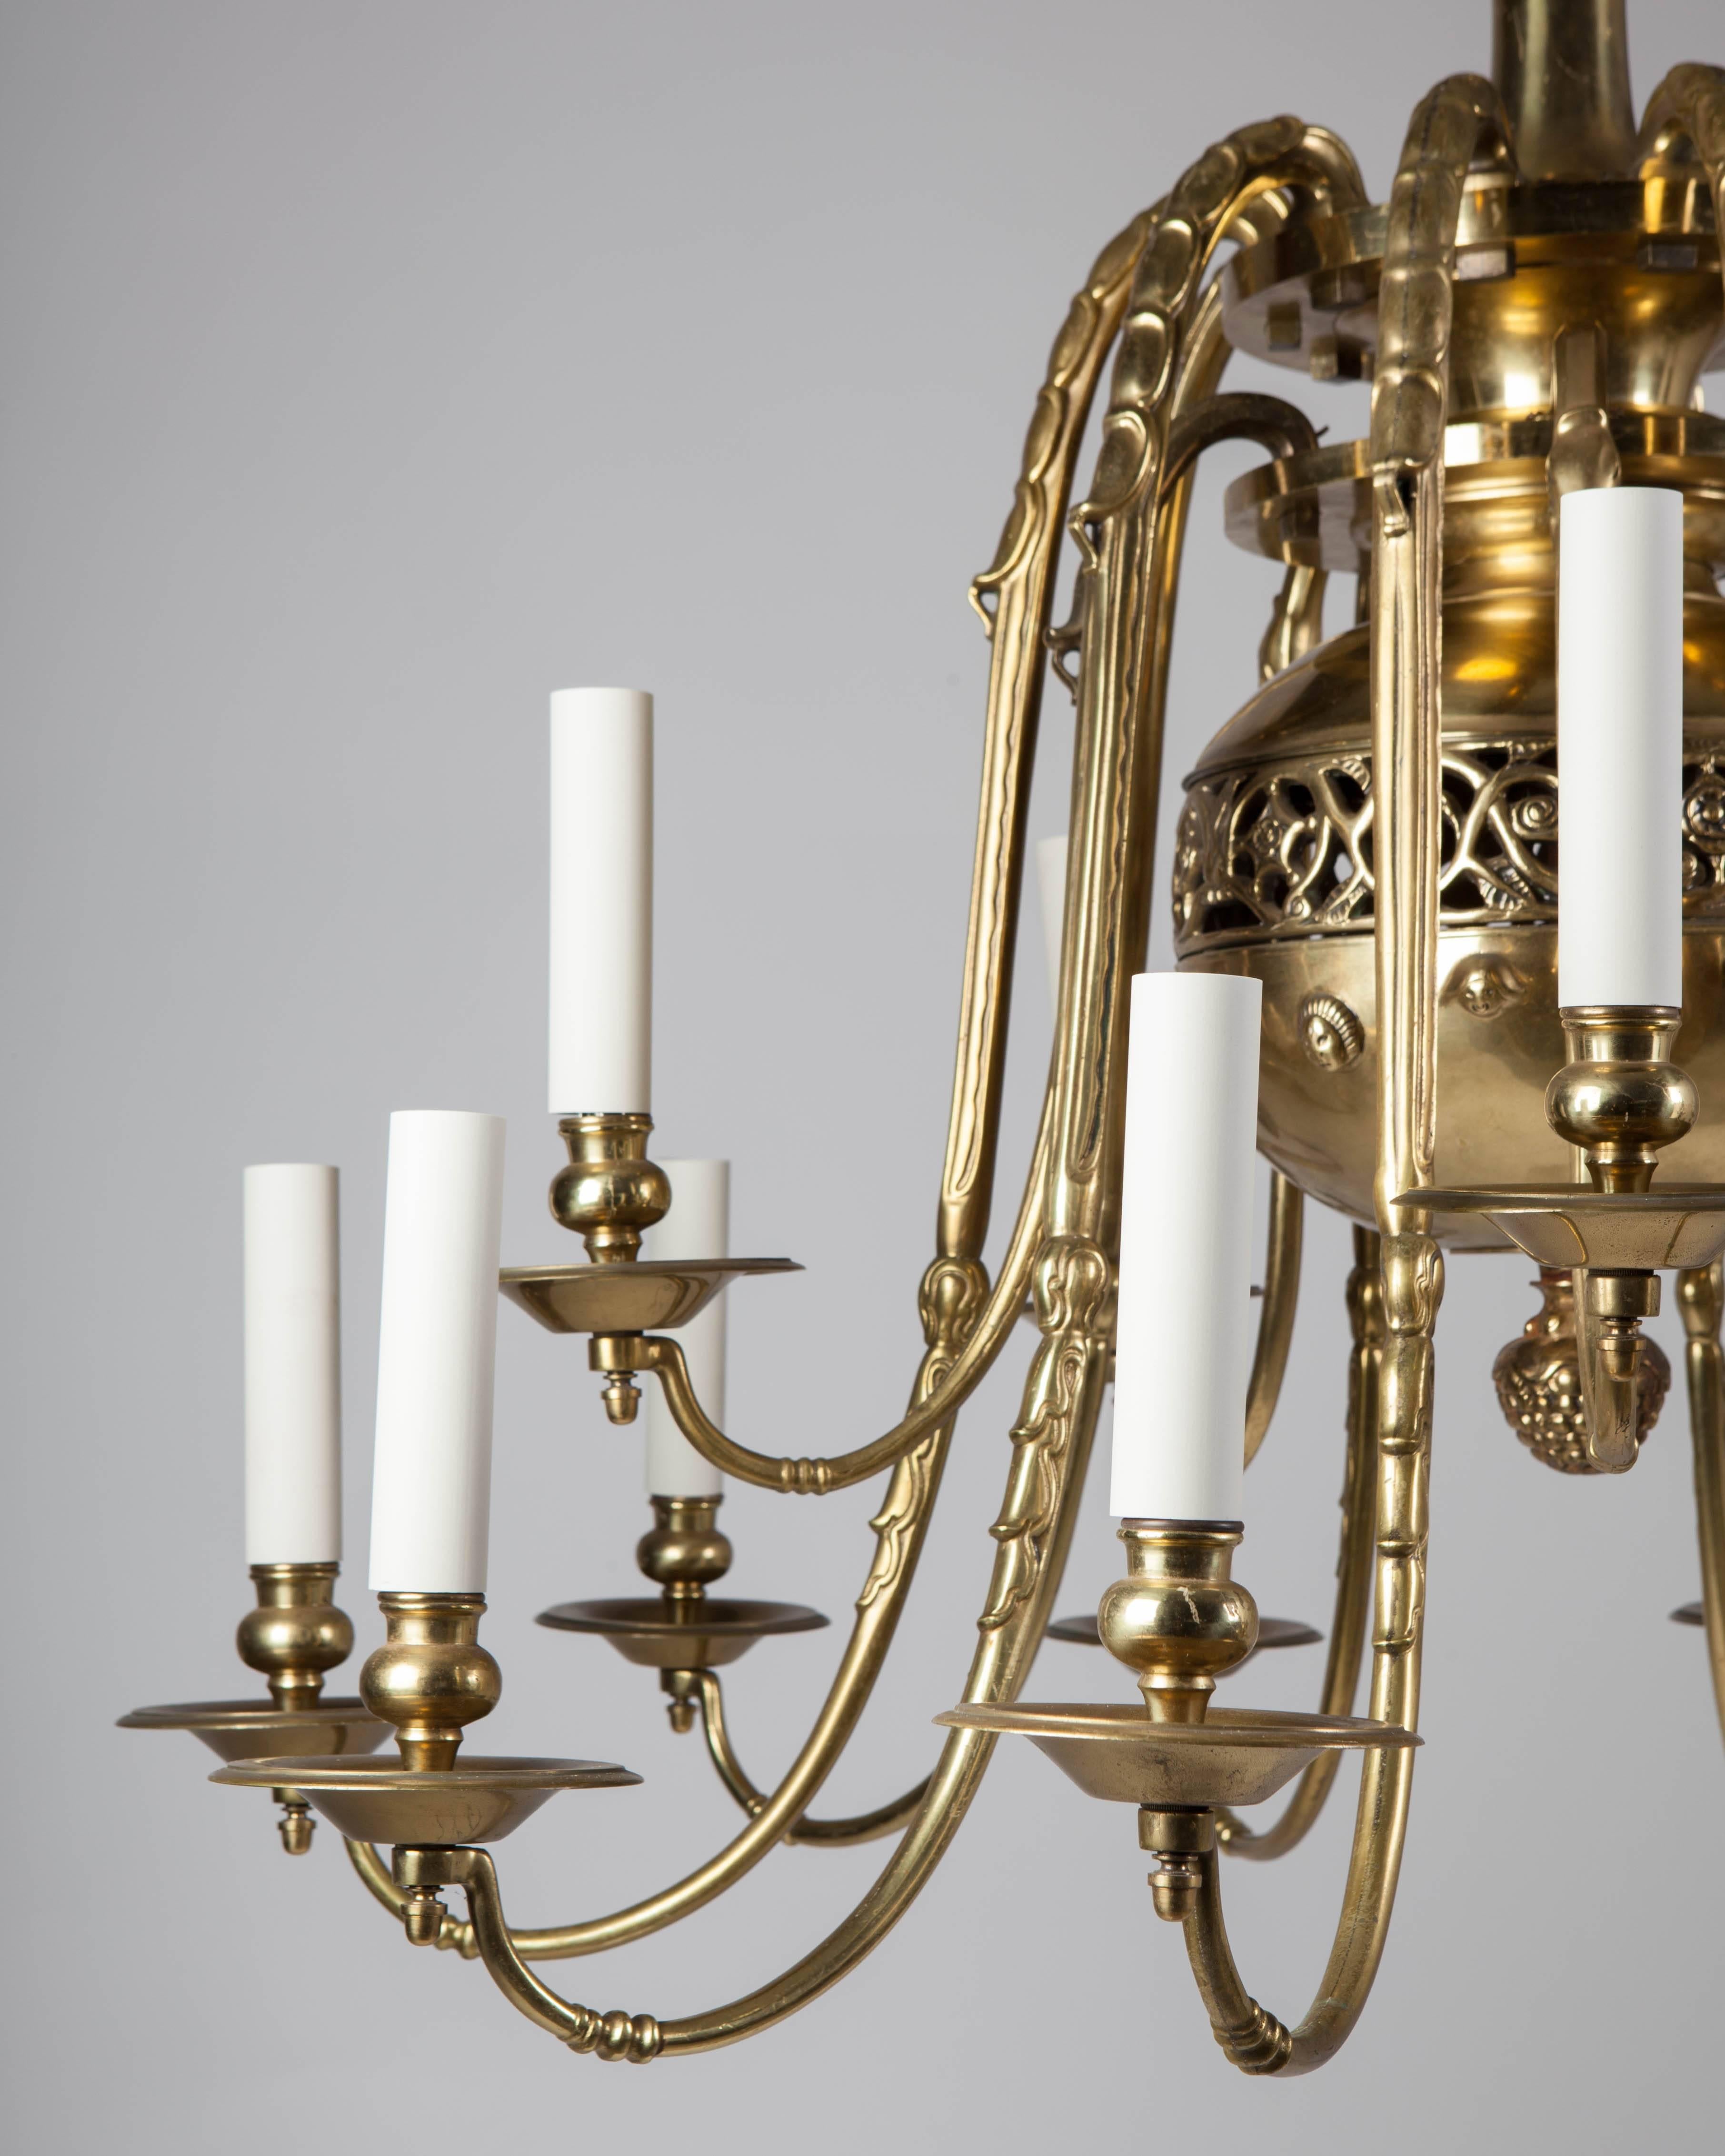 AHL3936.
An antique bronze chandelier with fifteen arms descending in two tiers from the pierced, baluster-form body. From a Cherry Hill, PA. estate.

Dimensions:
Current height: 60